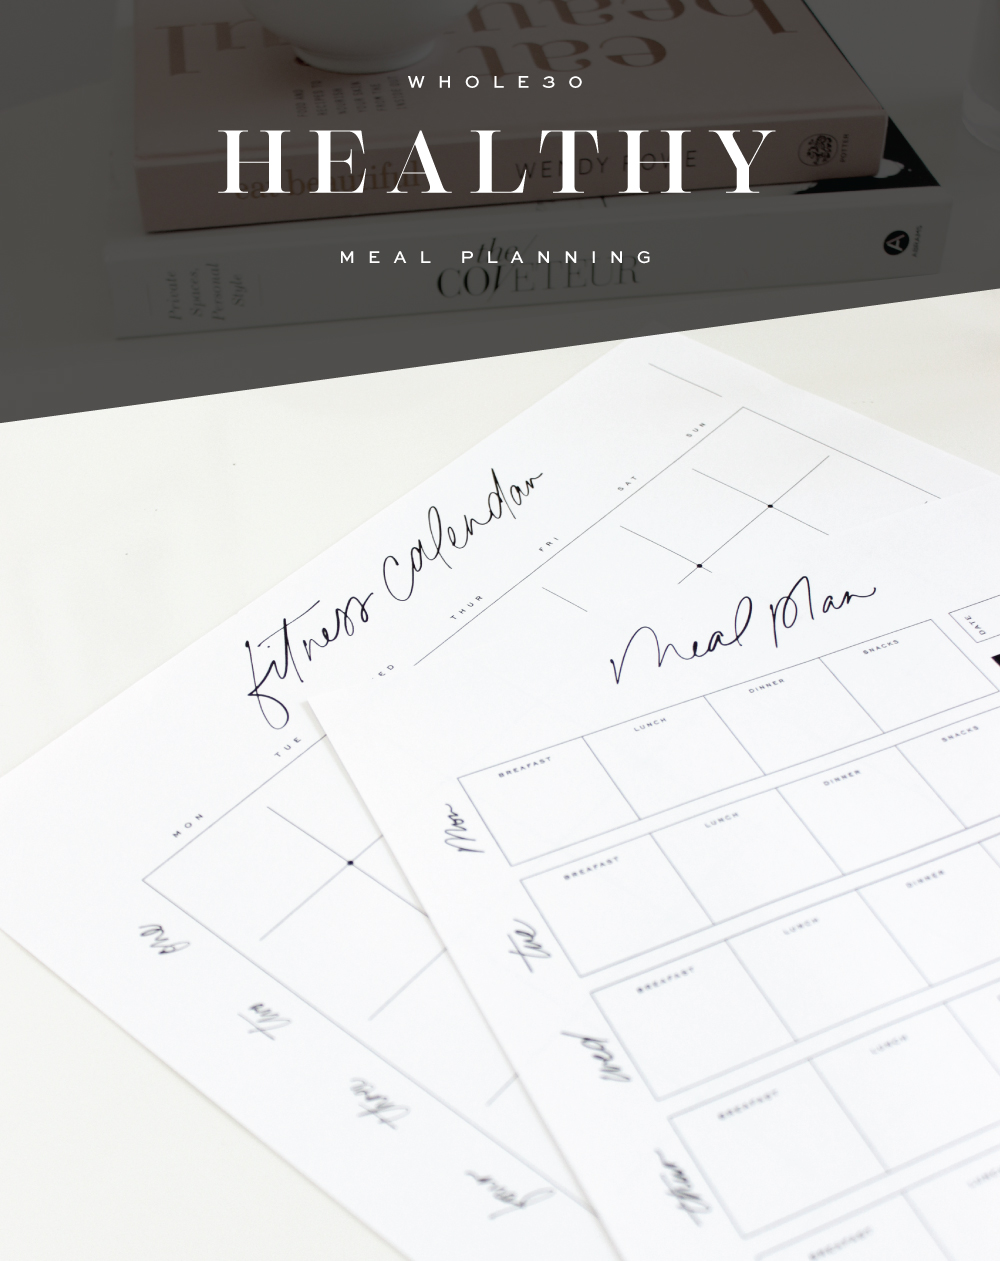 Whole30 Grocery List and Healthy Meal Planning